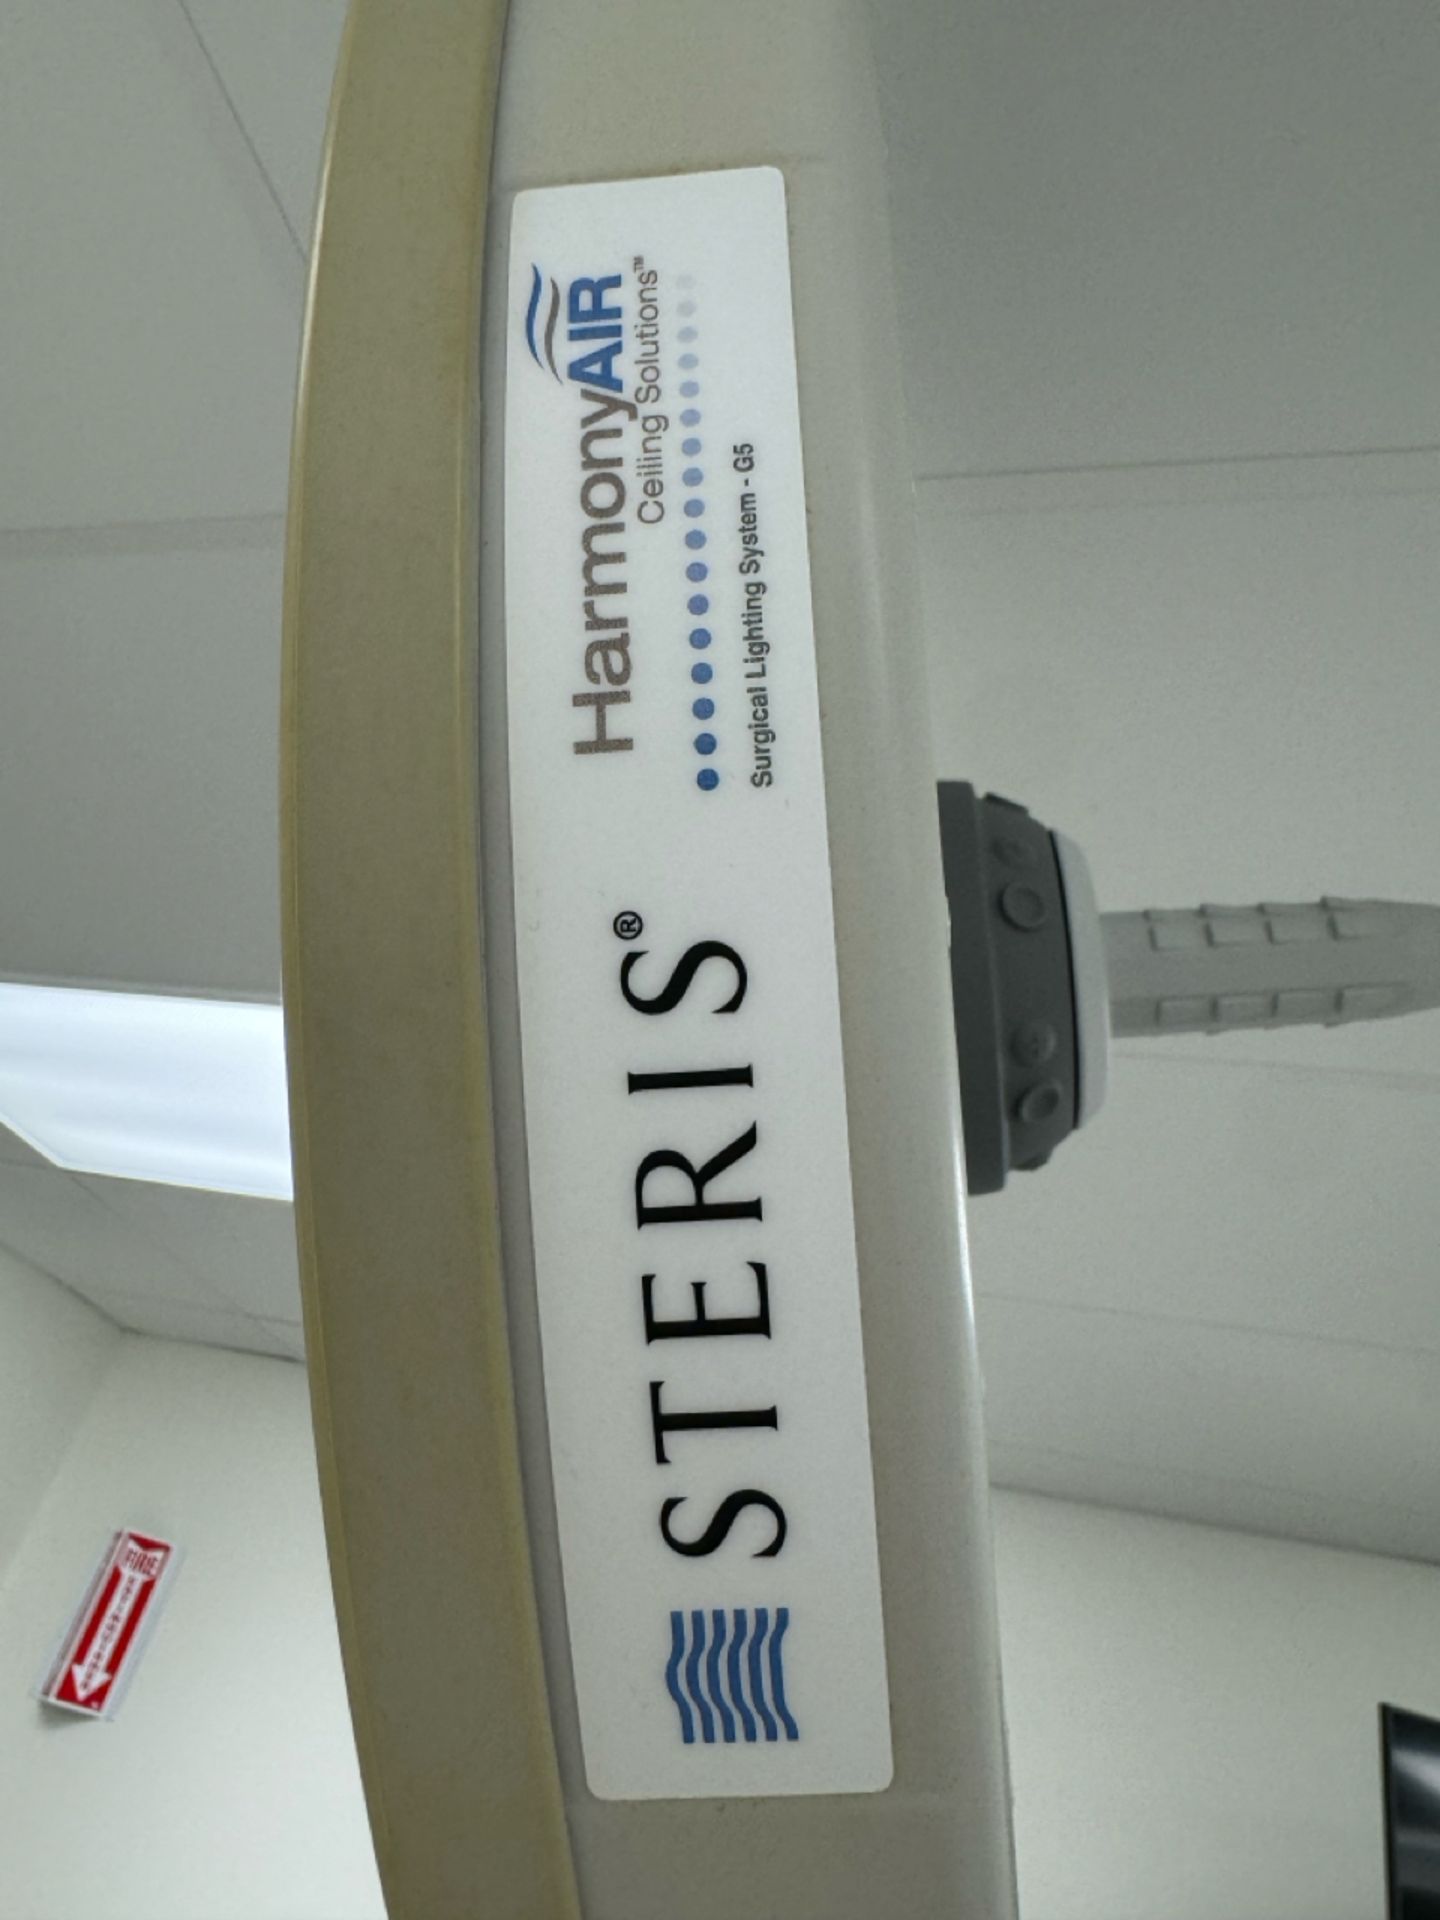 Steris Surgical Lighting System - Image 4 of 7